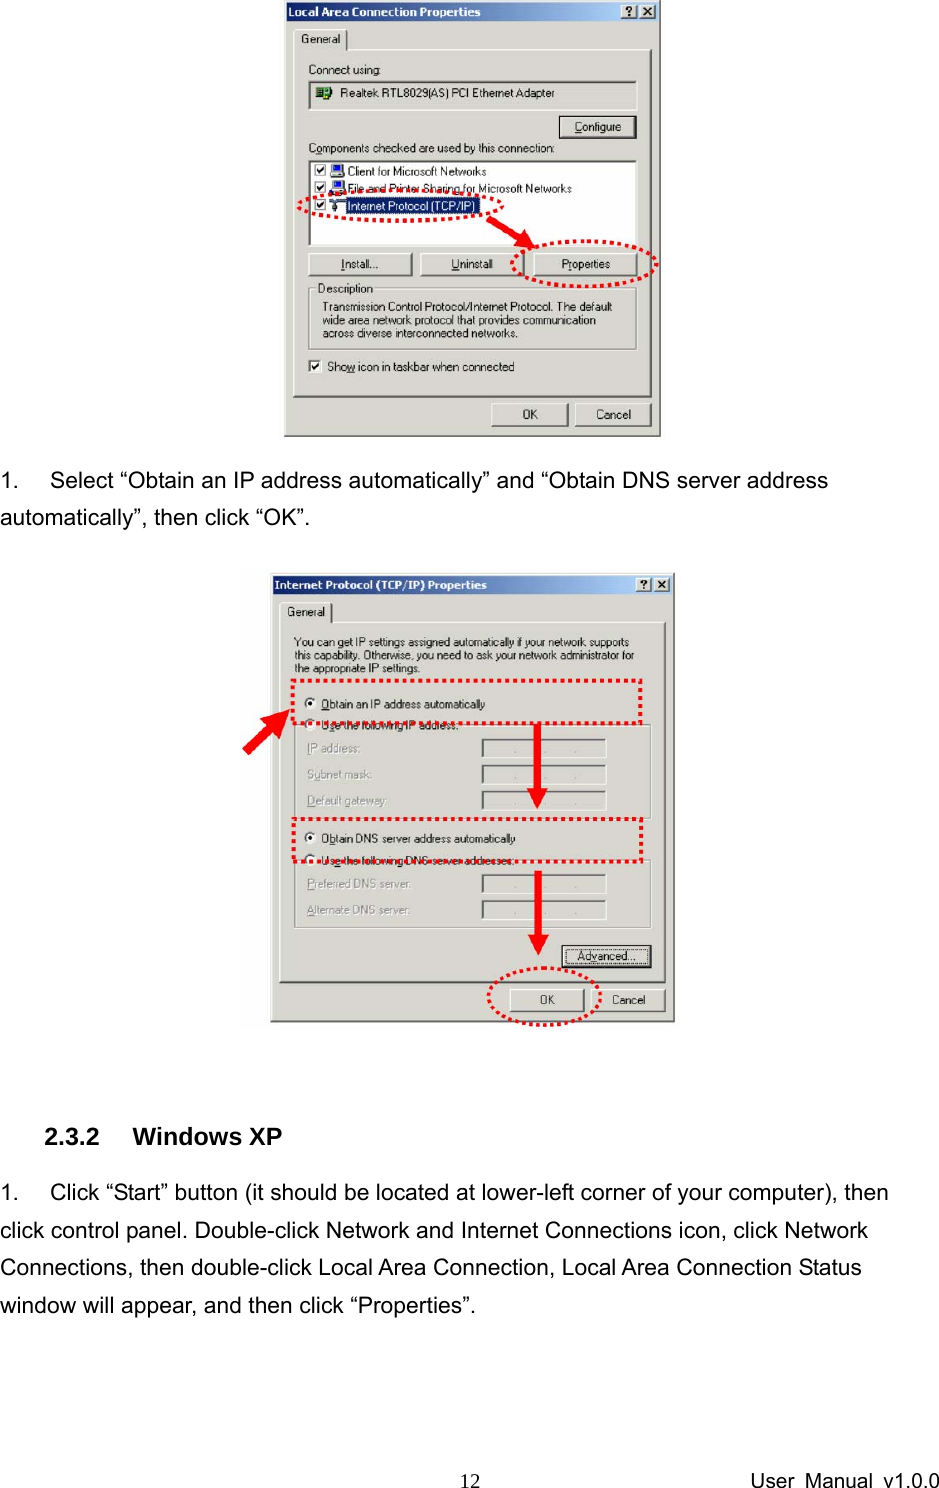                 User Manual v1.0.0 12 1.  Select “Obtain an IP address automatically” and “Obtain DNS server address automatically”, then click “OK”.   2.3.2 Windows XP 1.  Click “Start” button (it should be located at lower-left corner of your computer), then click control panel. Double-click Network and Internet Connections icon, click Network Connections, then double-click Local Area Connection, Local Area Connection Status window will appear, and then click “Properties”. 